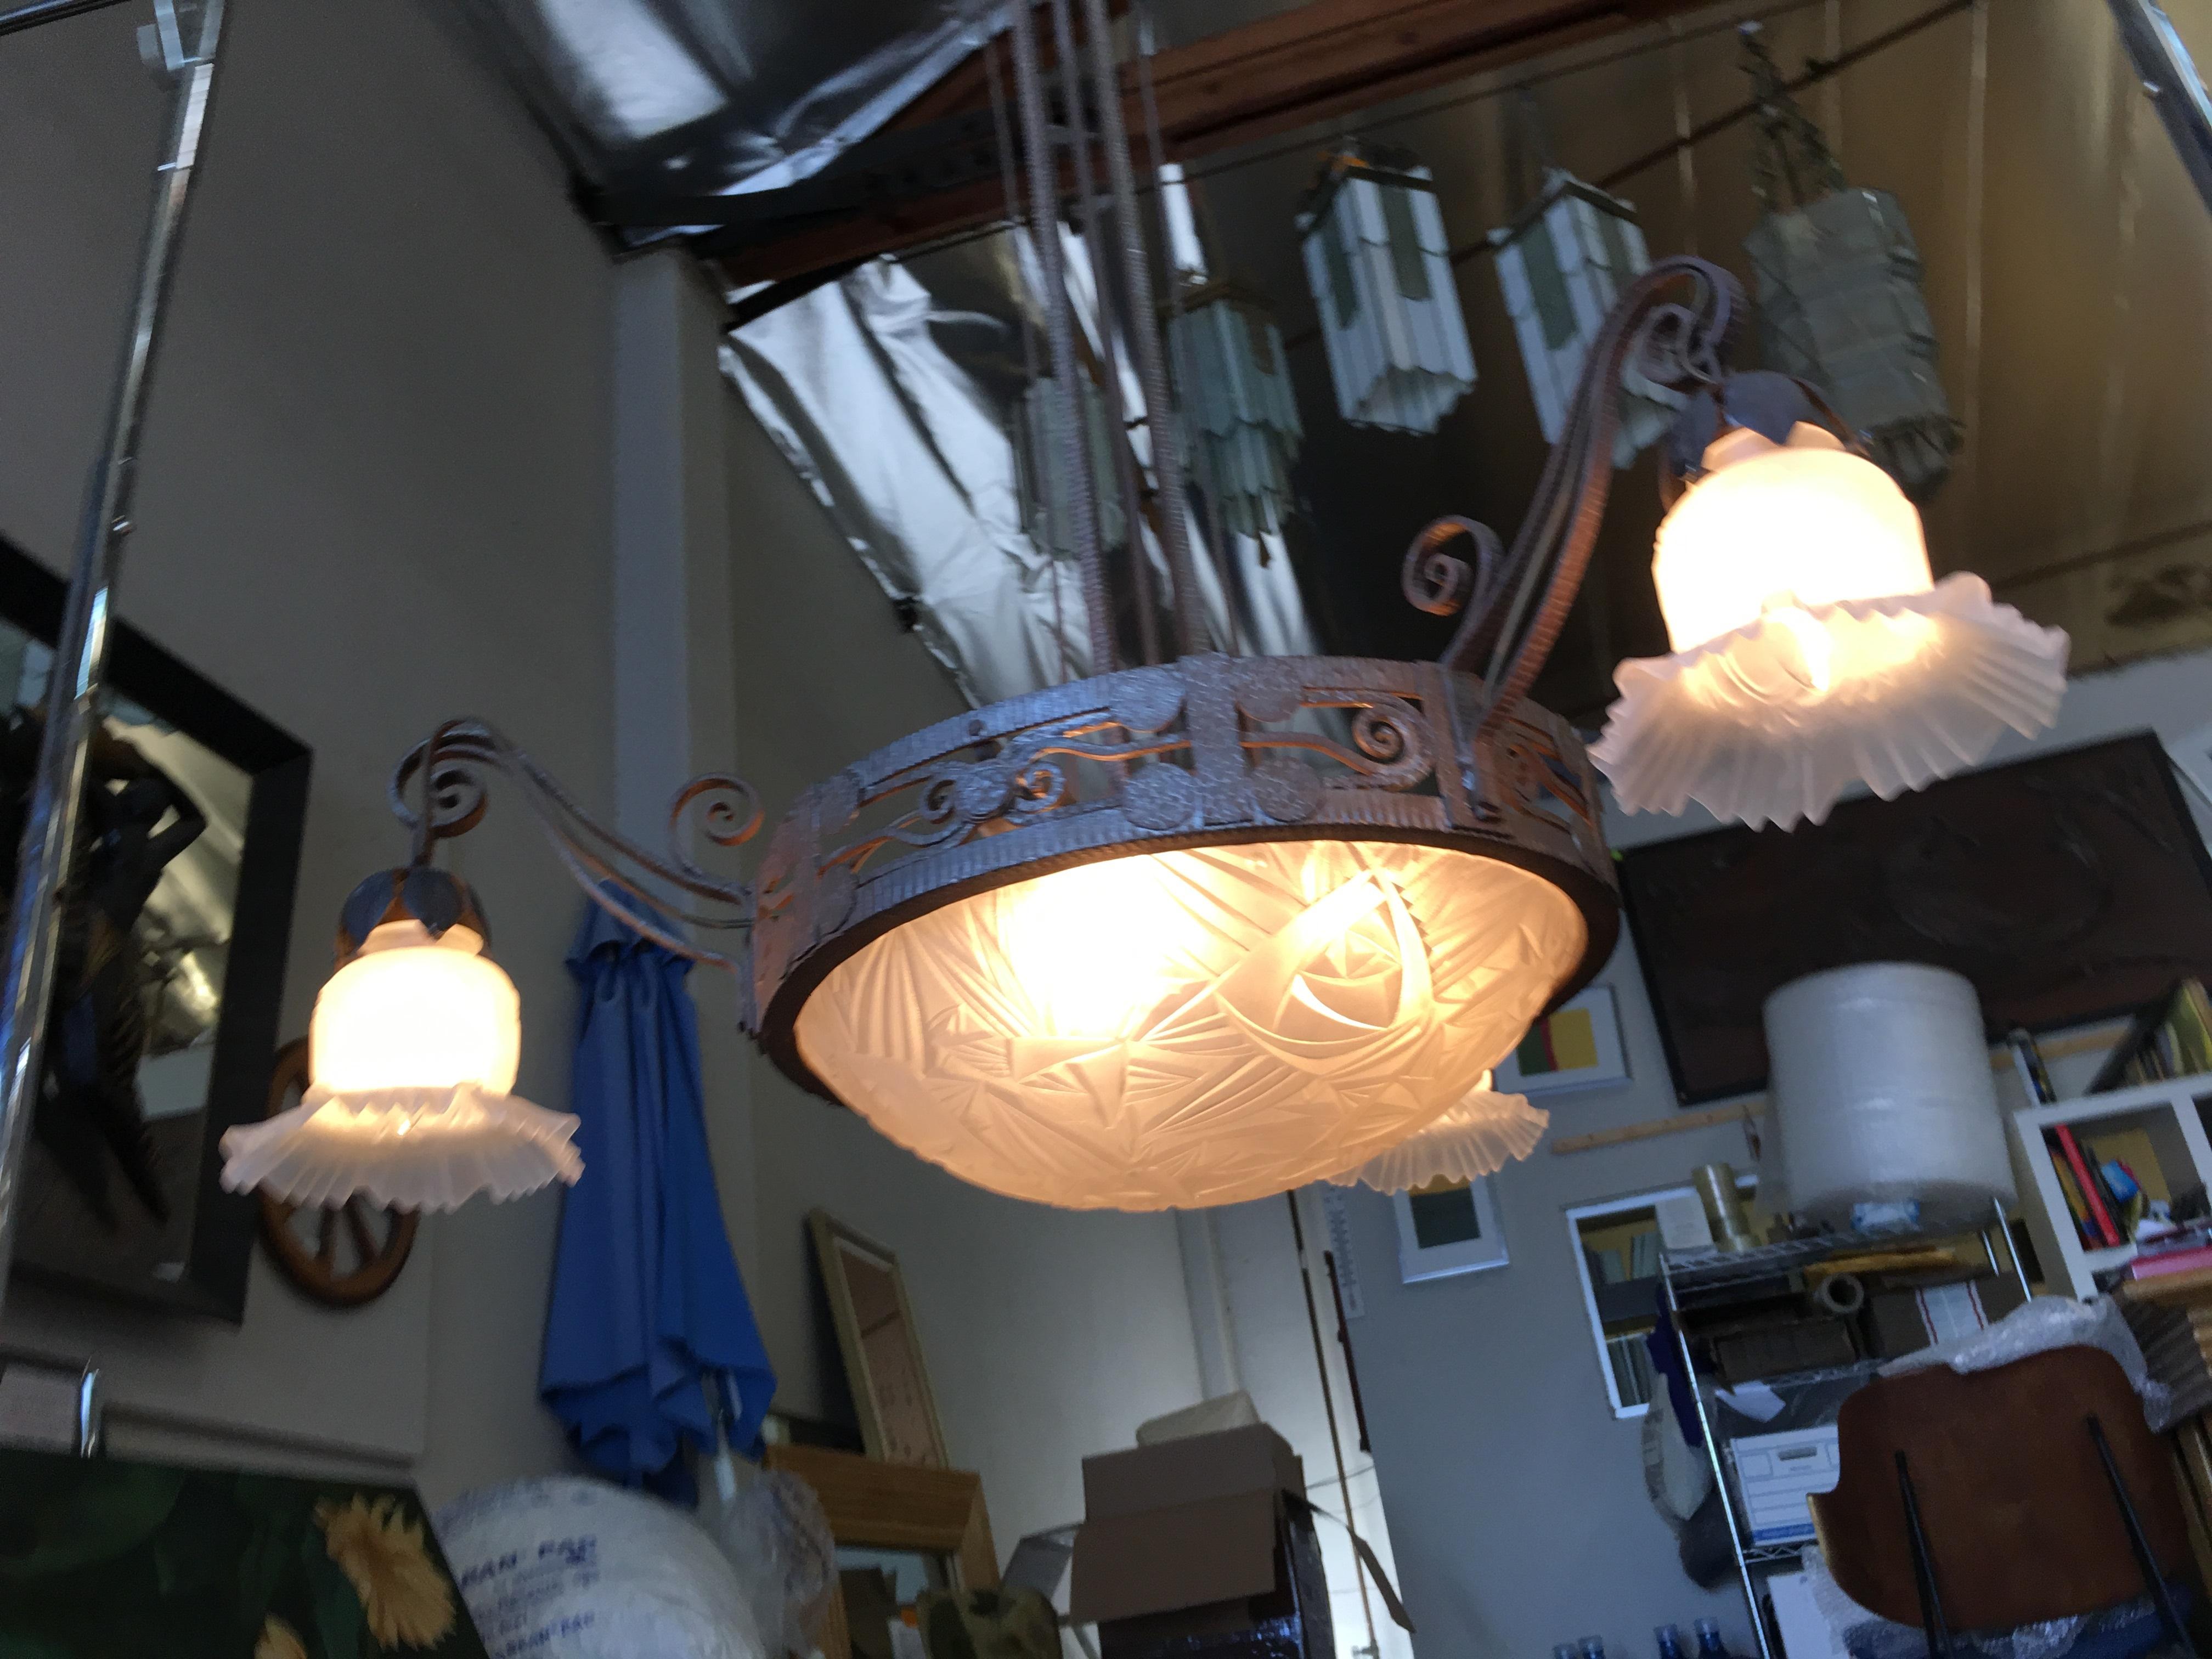 Hand-forged Mission style chandelier with 3 arms extending outward each holding a light and center dome light.

addx1